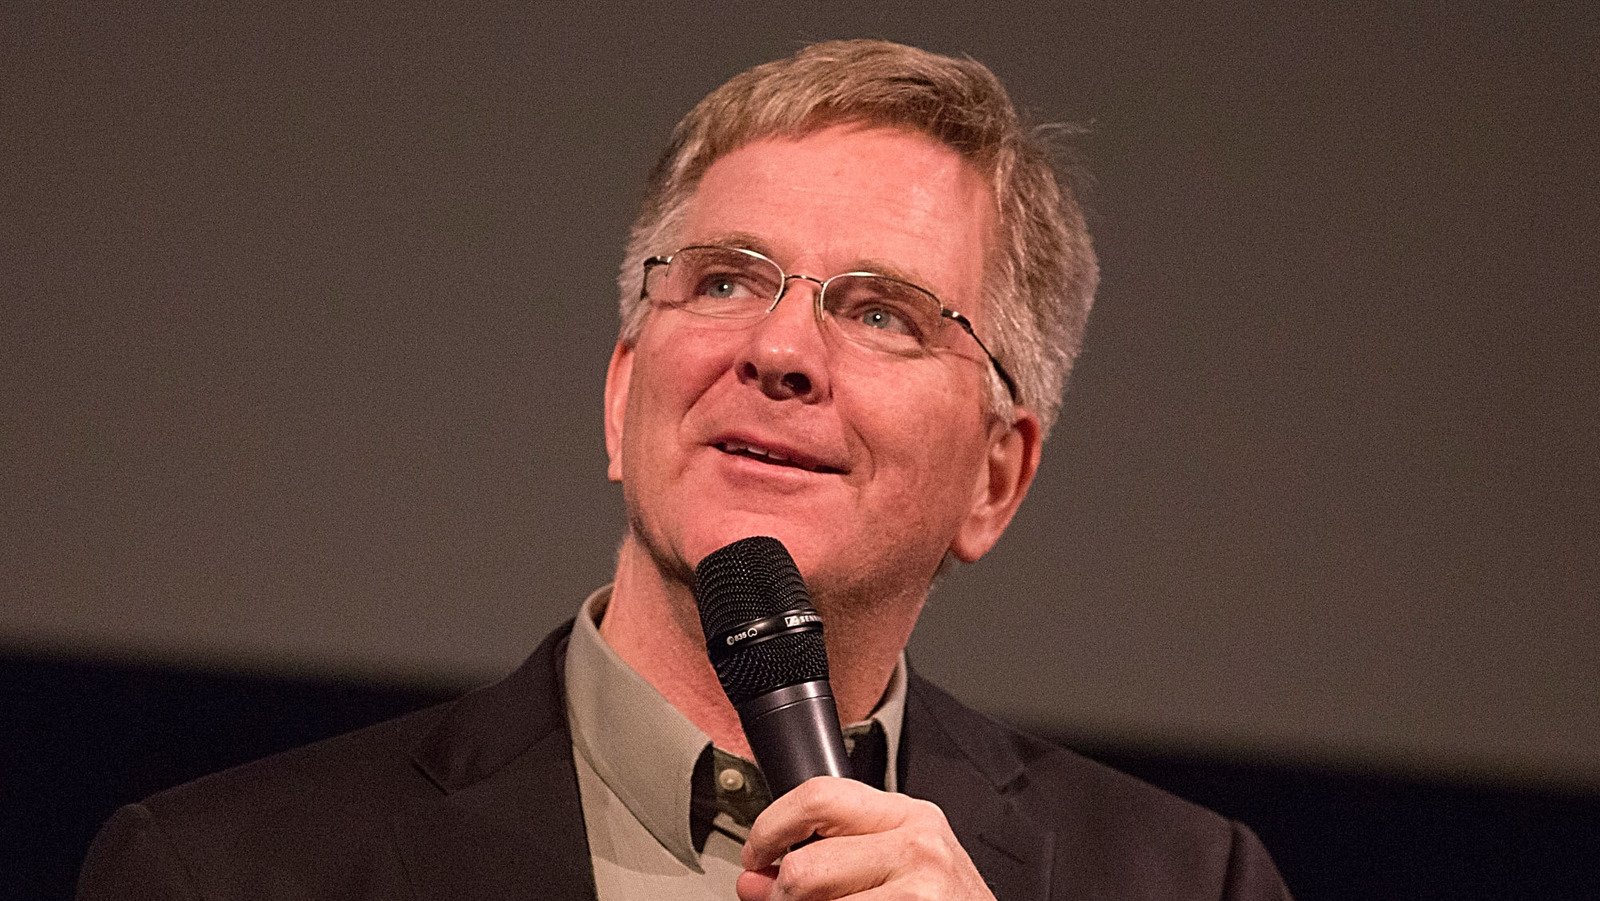 The Best Travel Tip To Use When Planning Your Next Trip, According To Travel Guru Rick Steves